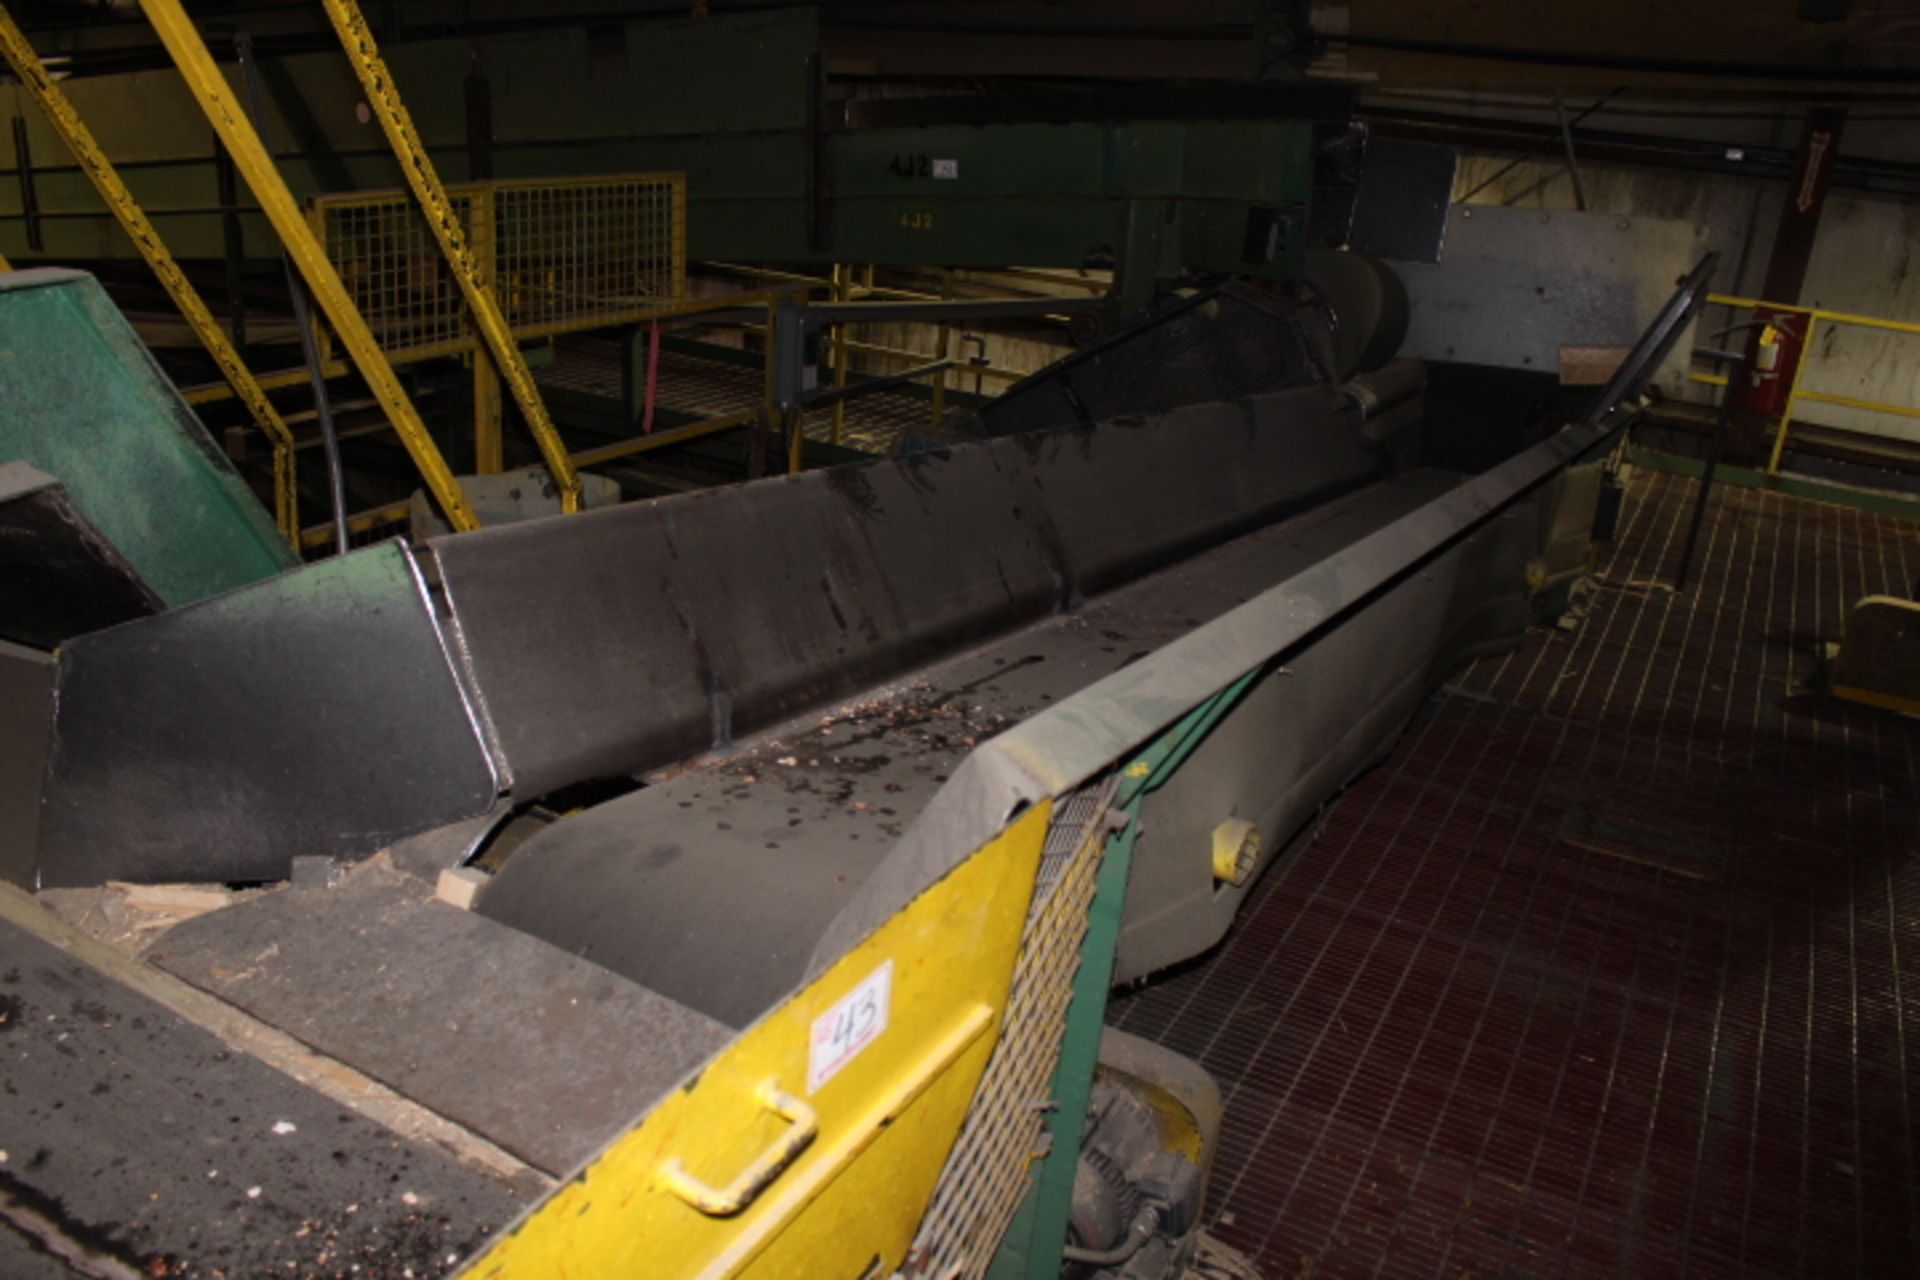 24" X 27' BELT CONVEYOR, OUTFEED FROM CONVEYOR 4J3 AND MAN SORTING STATION, ASSET NO. 4J4, MOTOR & - Image 2 of 3